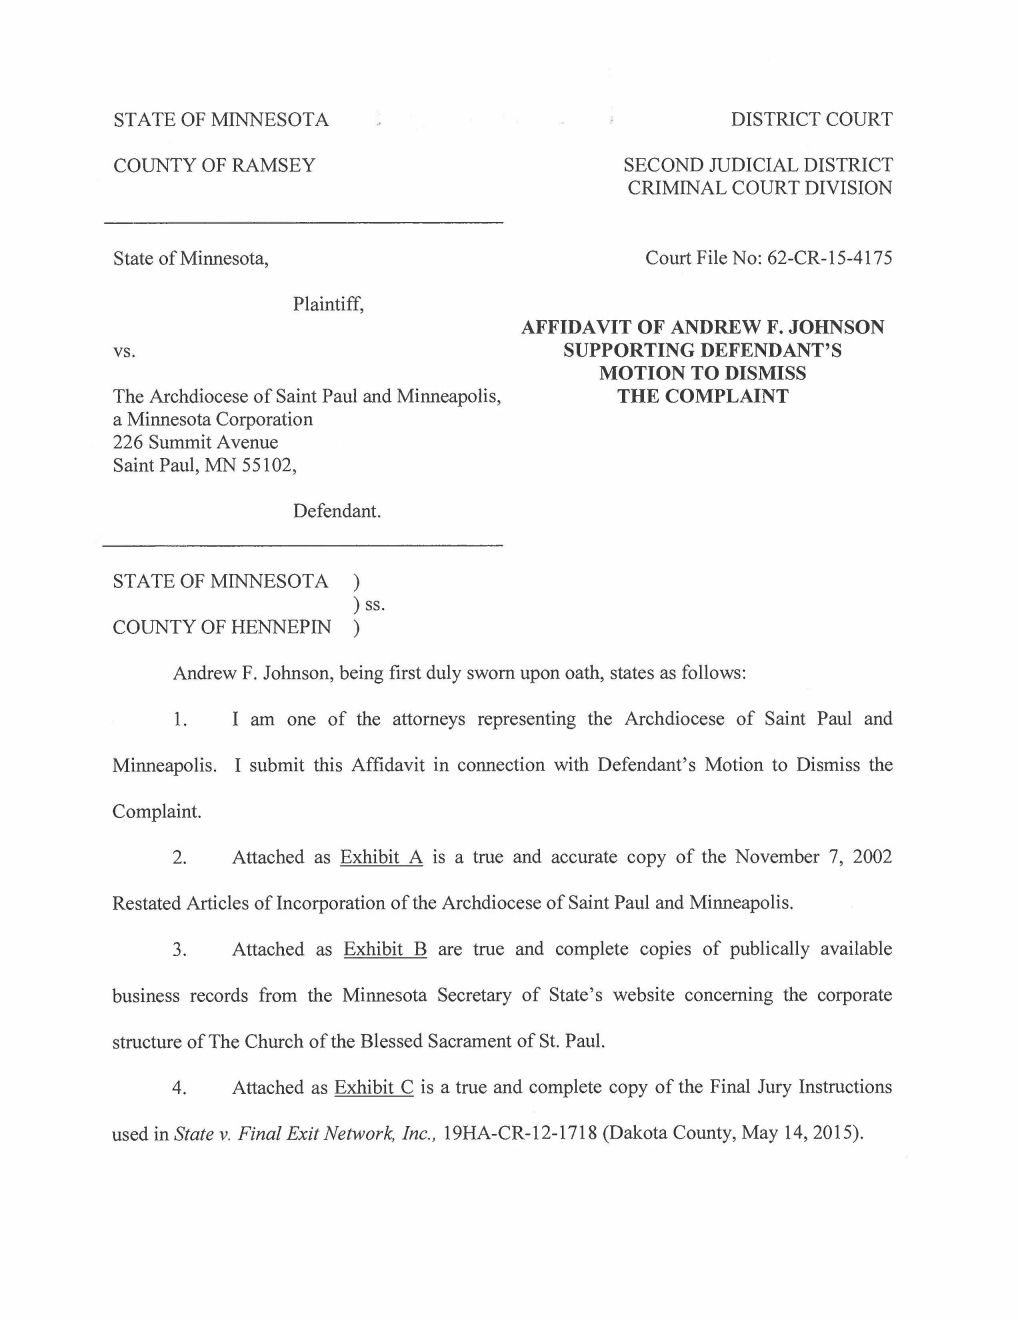 AFFIDAVIT of ANDREW F. JOHNSON SUPPORTING DEFENDANT's MOTION to DISMISS the COMPLAINT the Archdiocese of Saint Paul and Minneapo